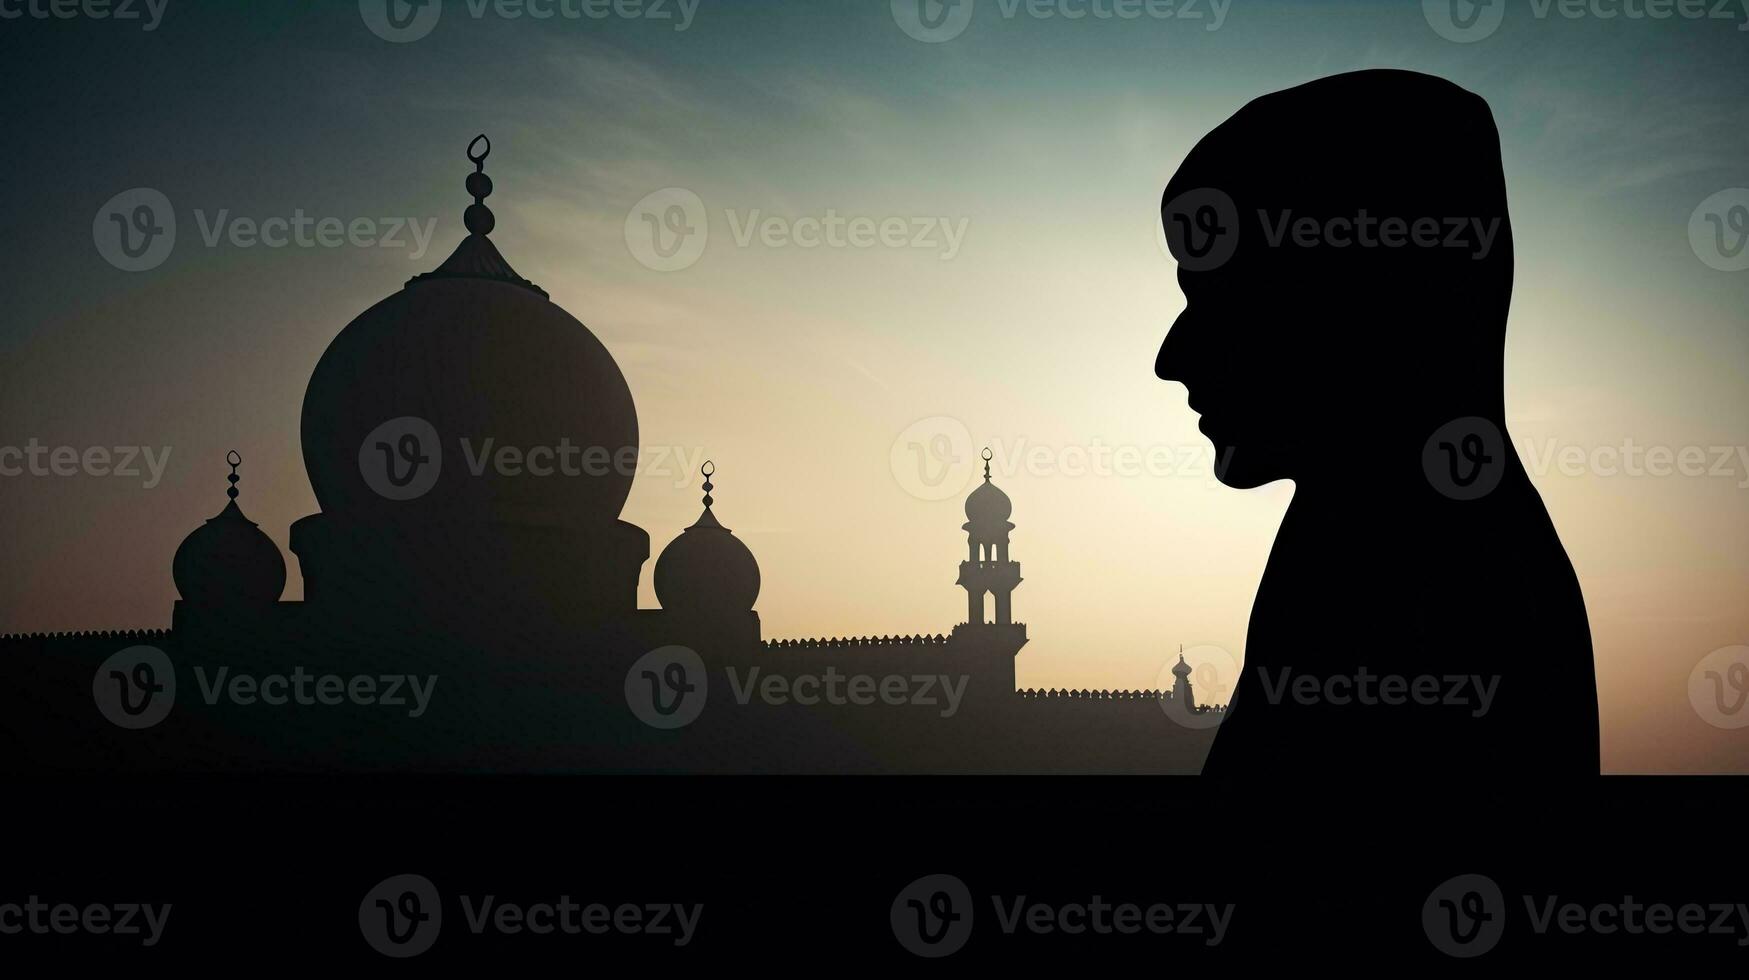 Silhouette of antiquated mosque captured in a photograph photo